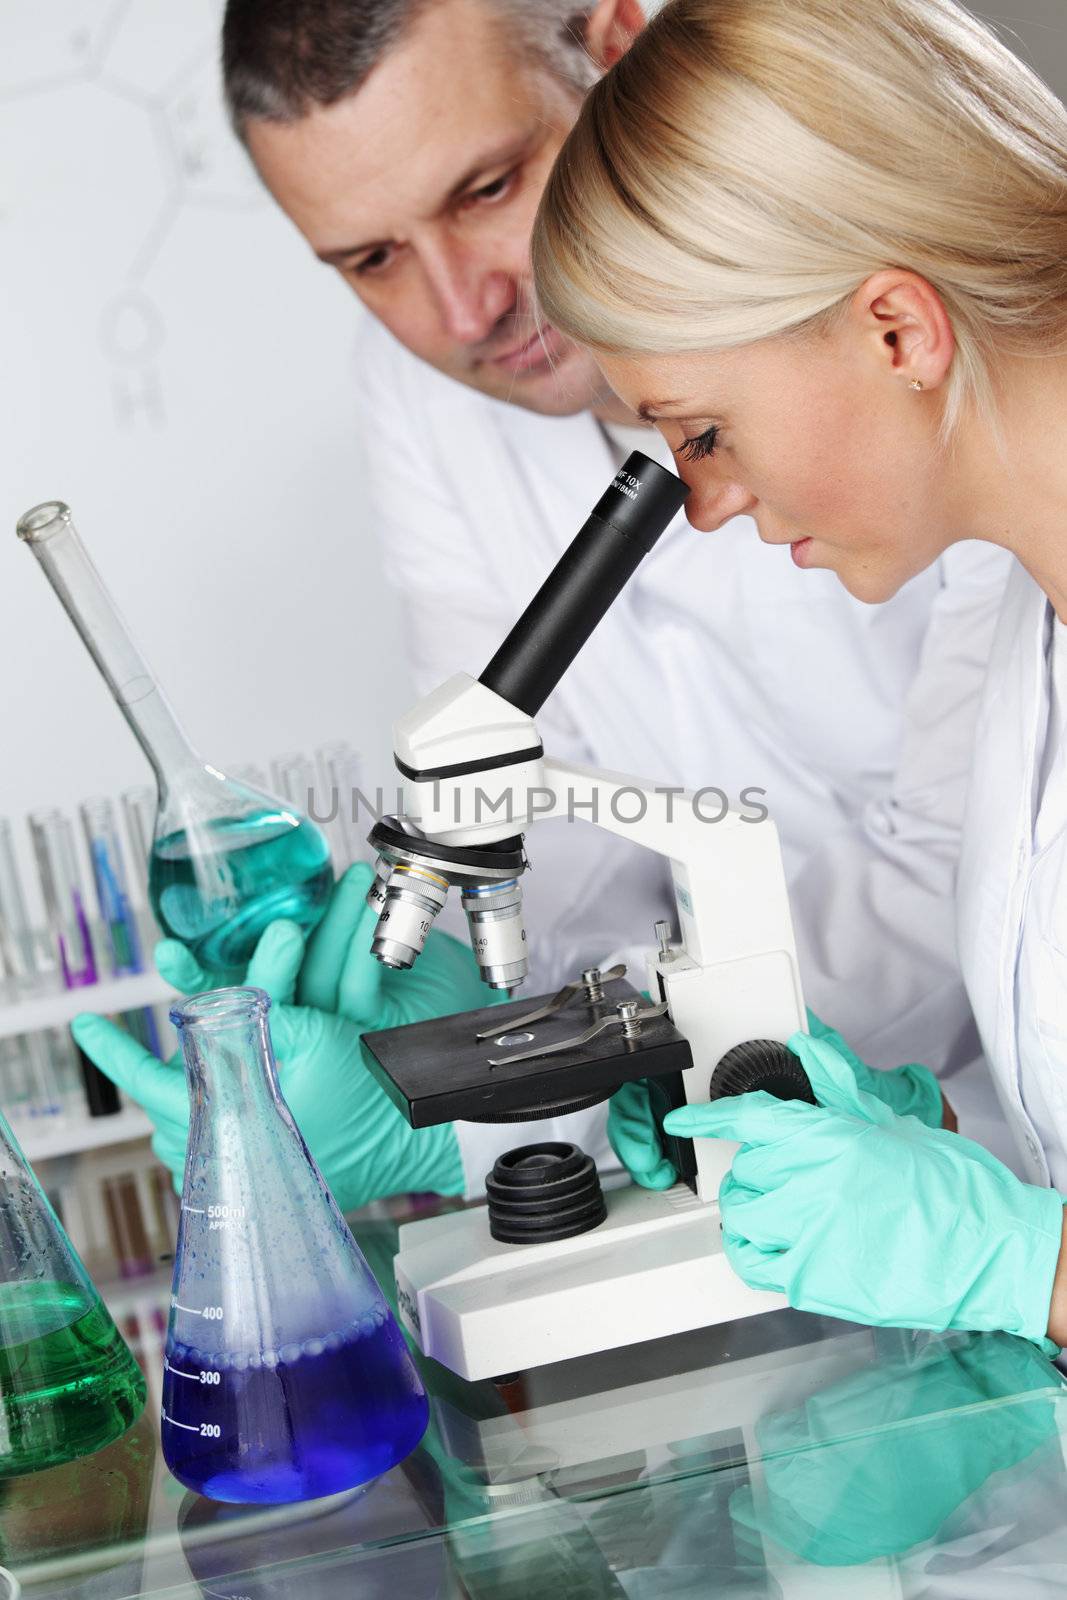 two scientist in chemical lab conducting experiments